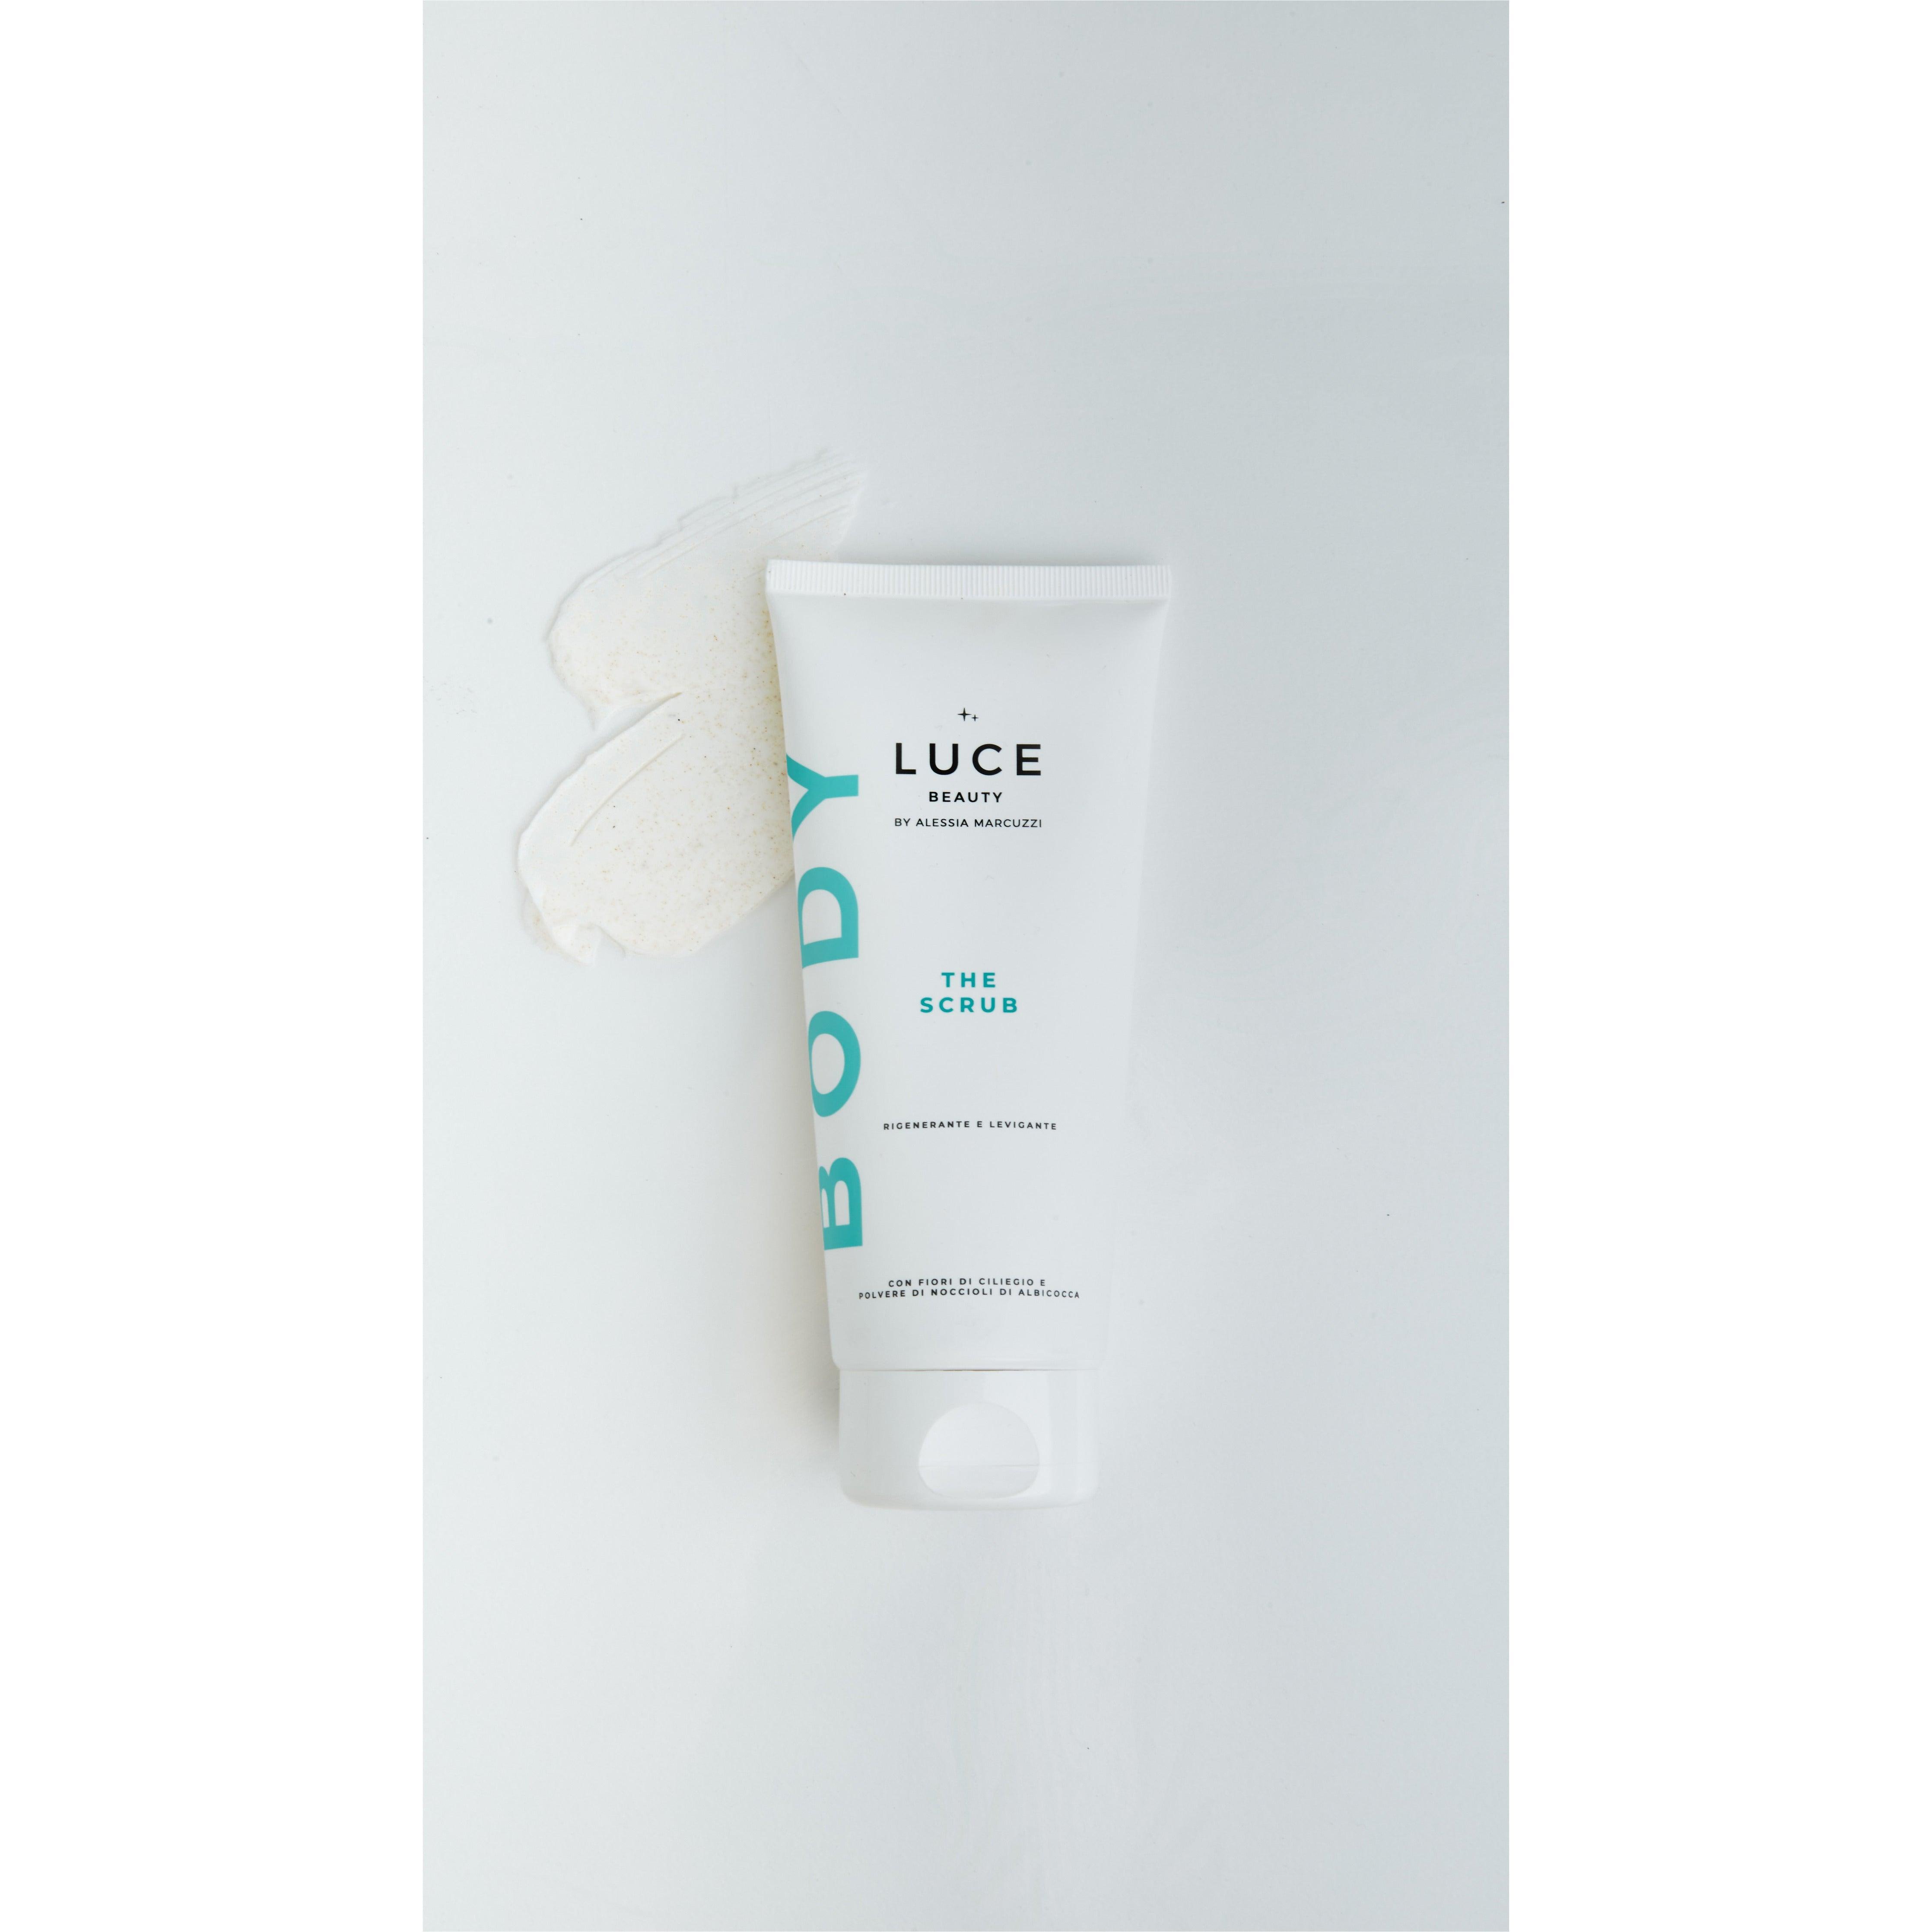 The Scrub - texture - Luce Beauty by Alessia Marcuzzi